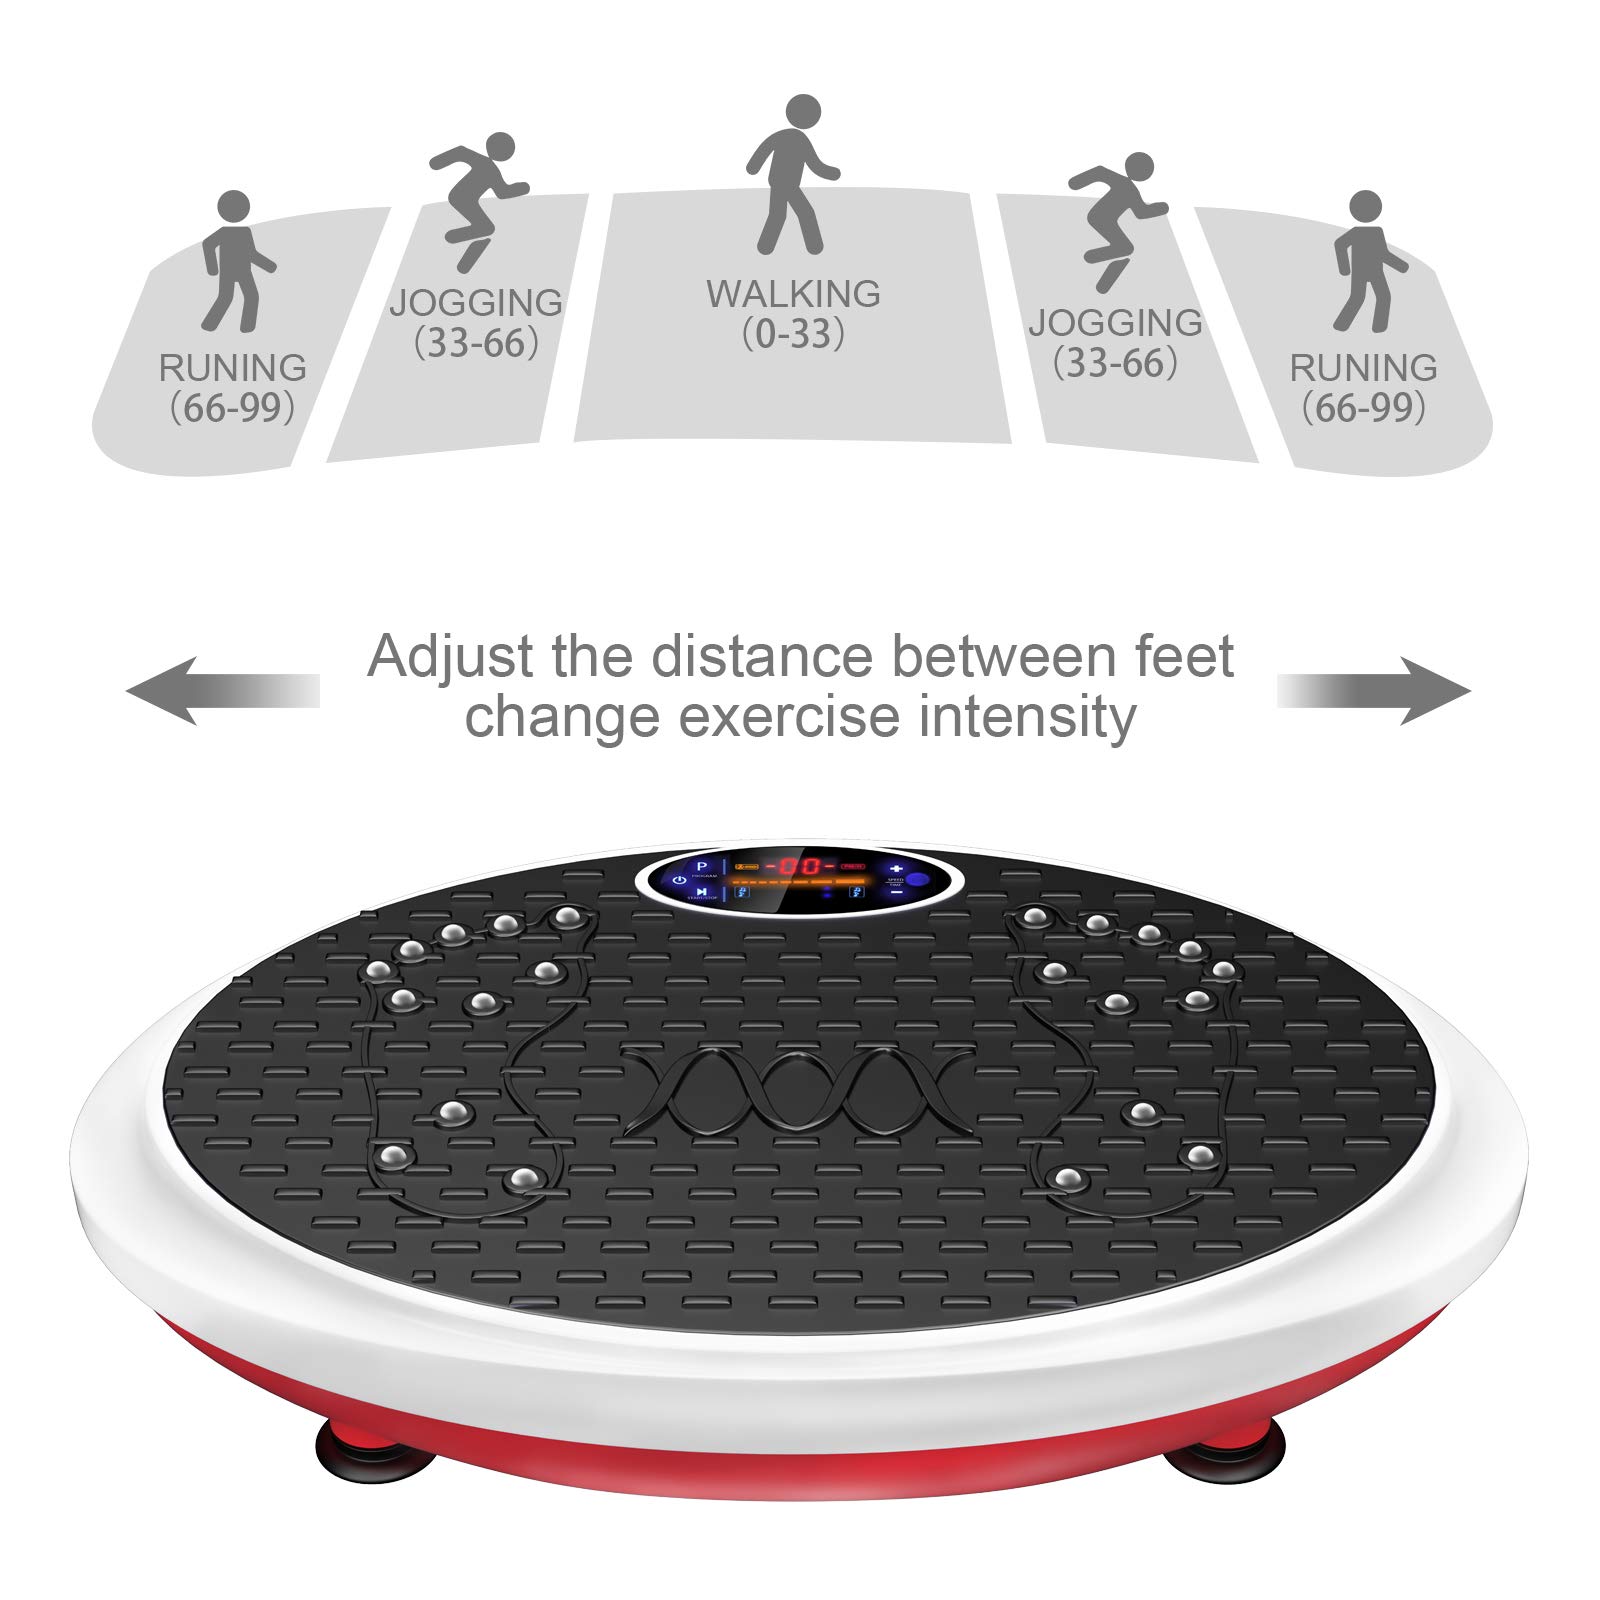 Real Relax Vibration Plate Exercise Machine Whole Body Workout for Home Strenuous Exercise for Weight Loss & Toning with Resistance Band, Remote Control and Support 330Ibs, Red & White